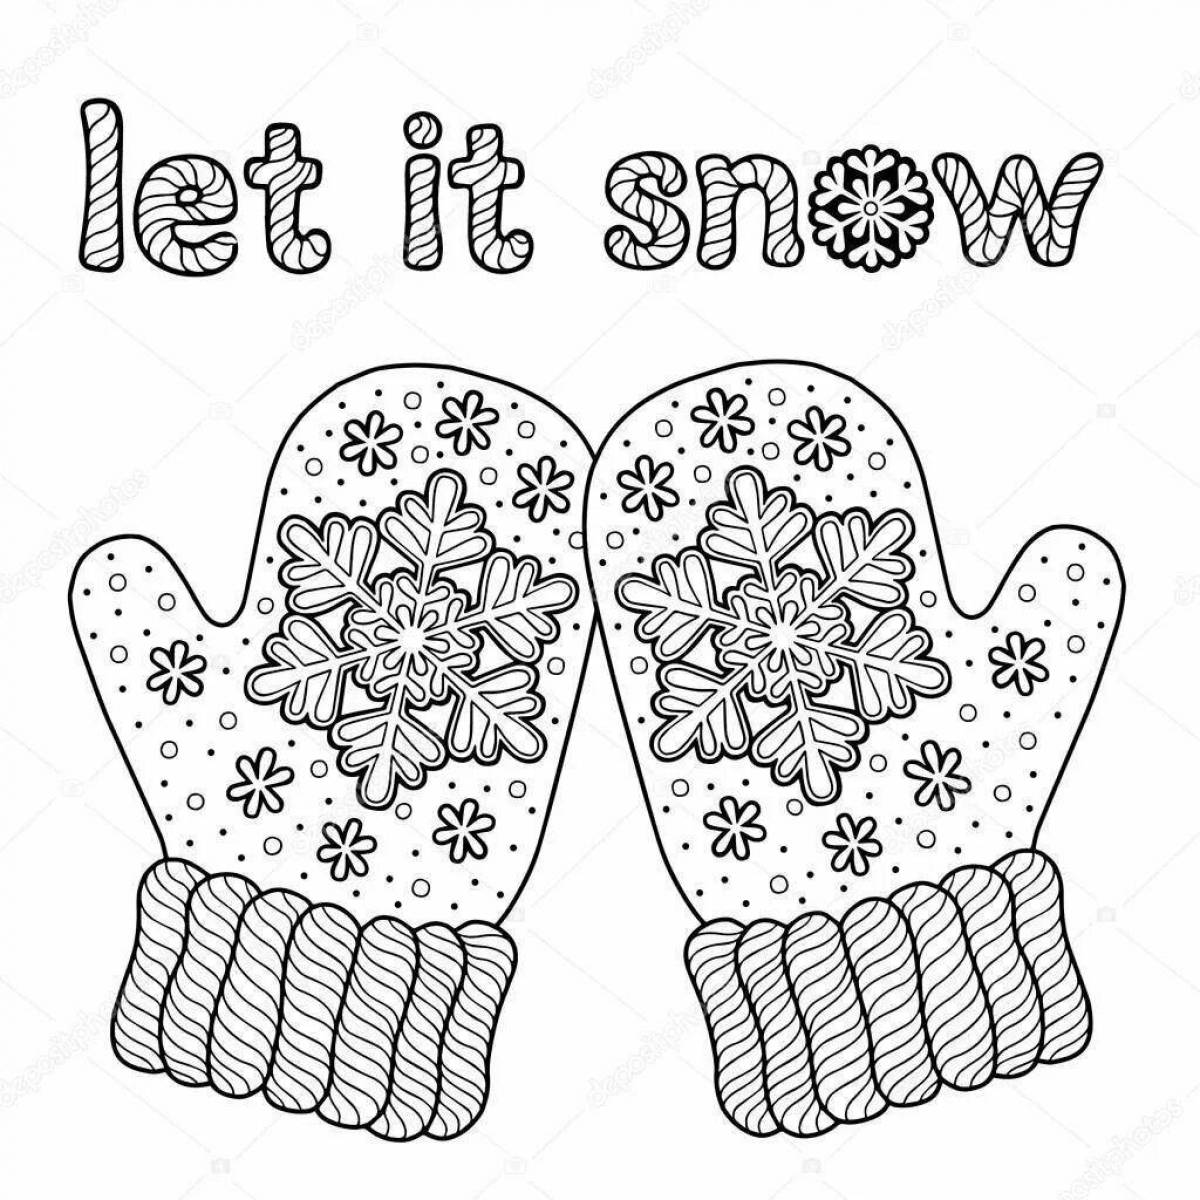 Coloring page for kids with fancy pattern mittens